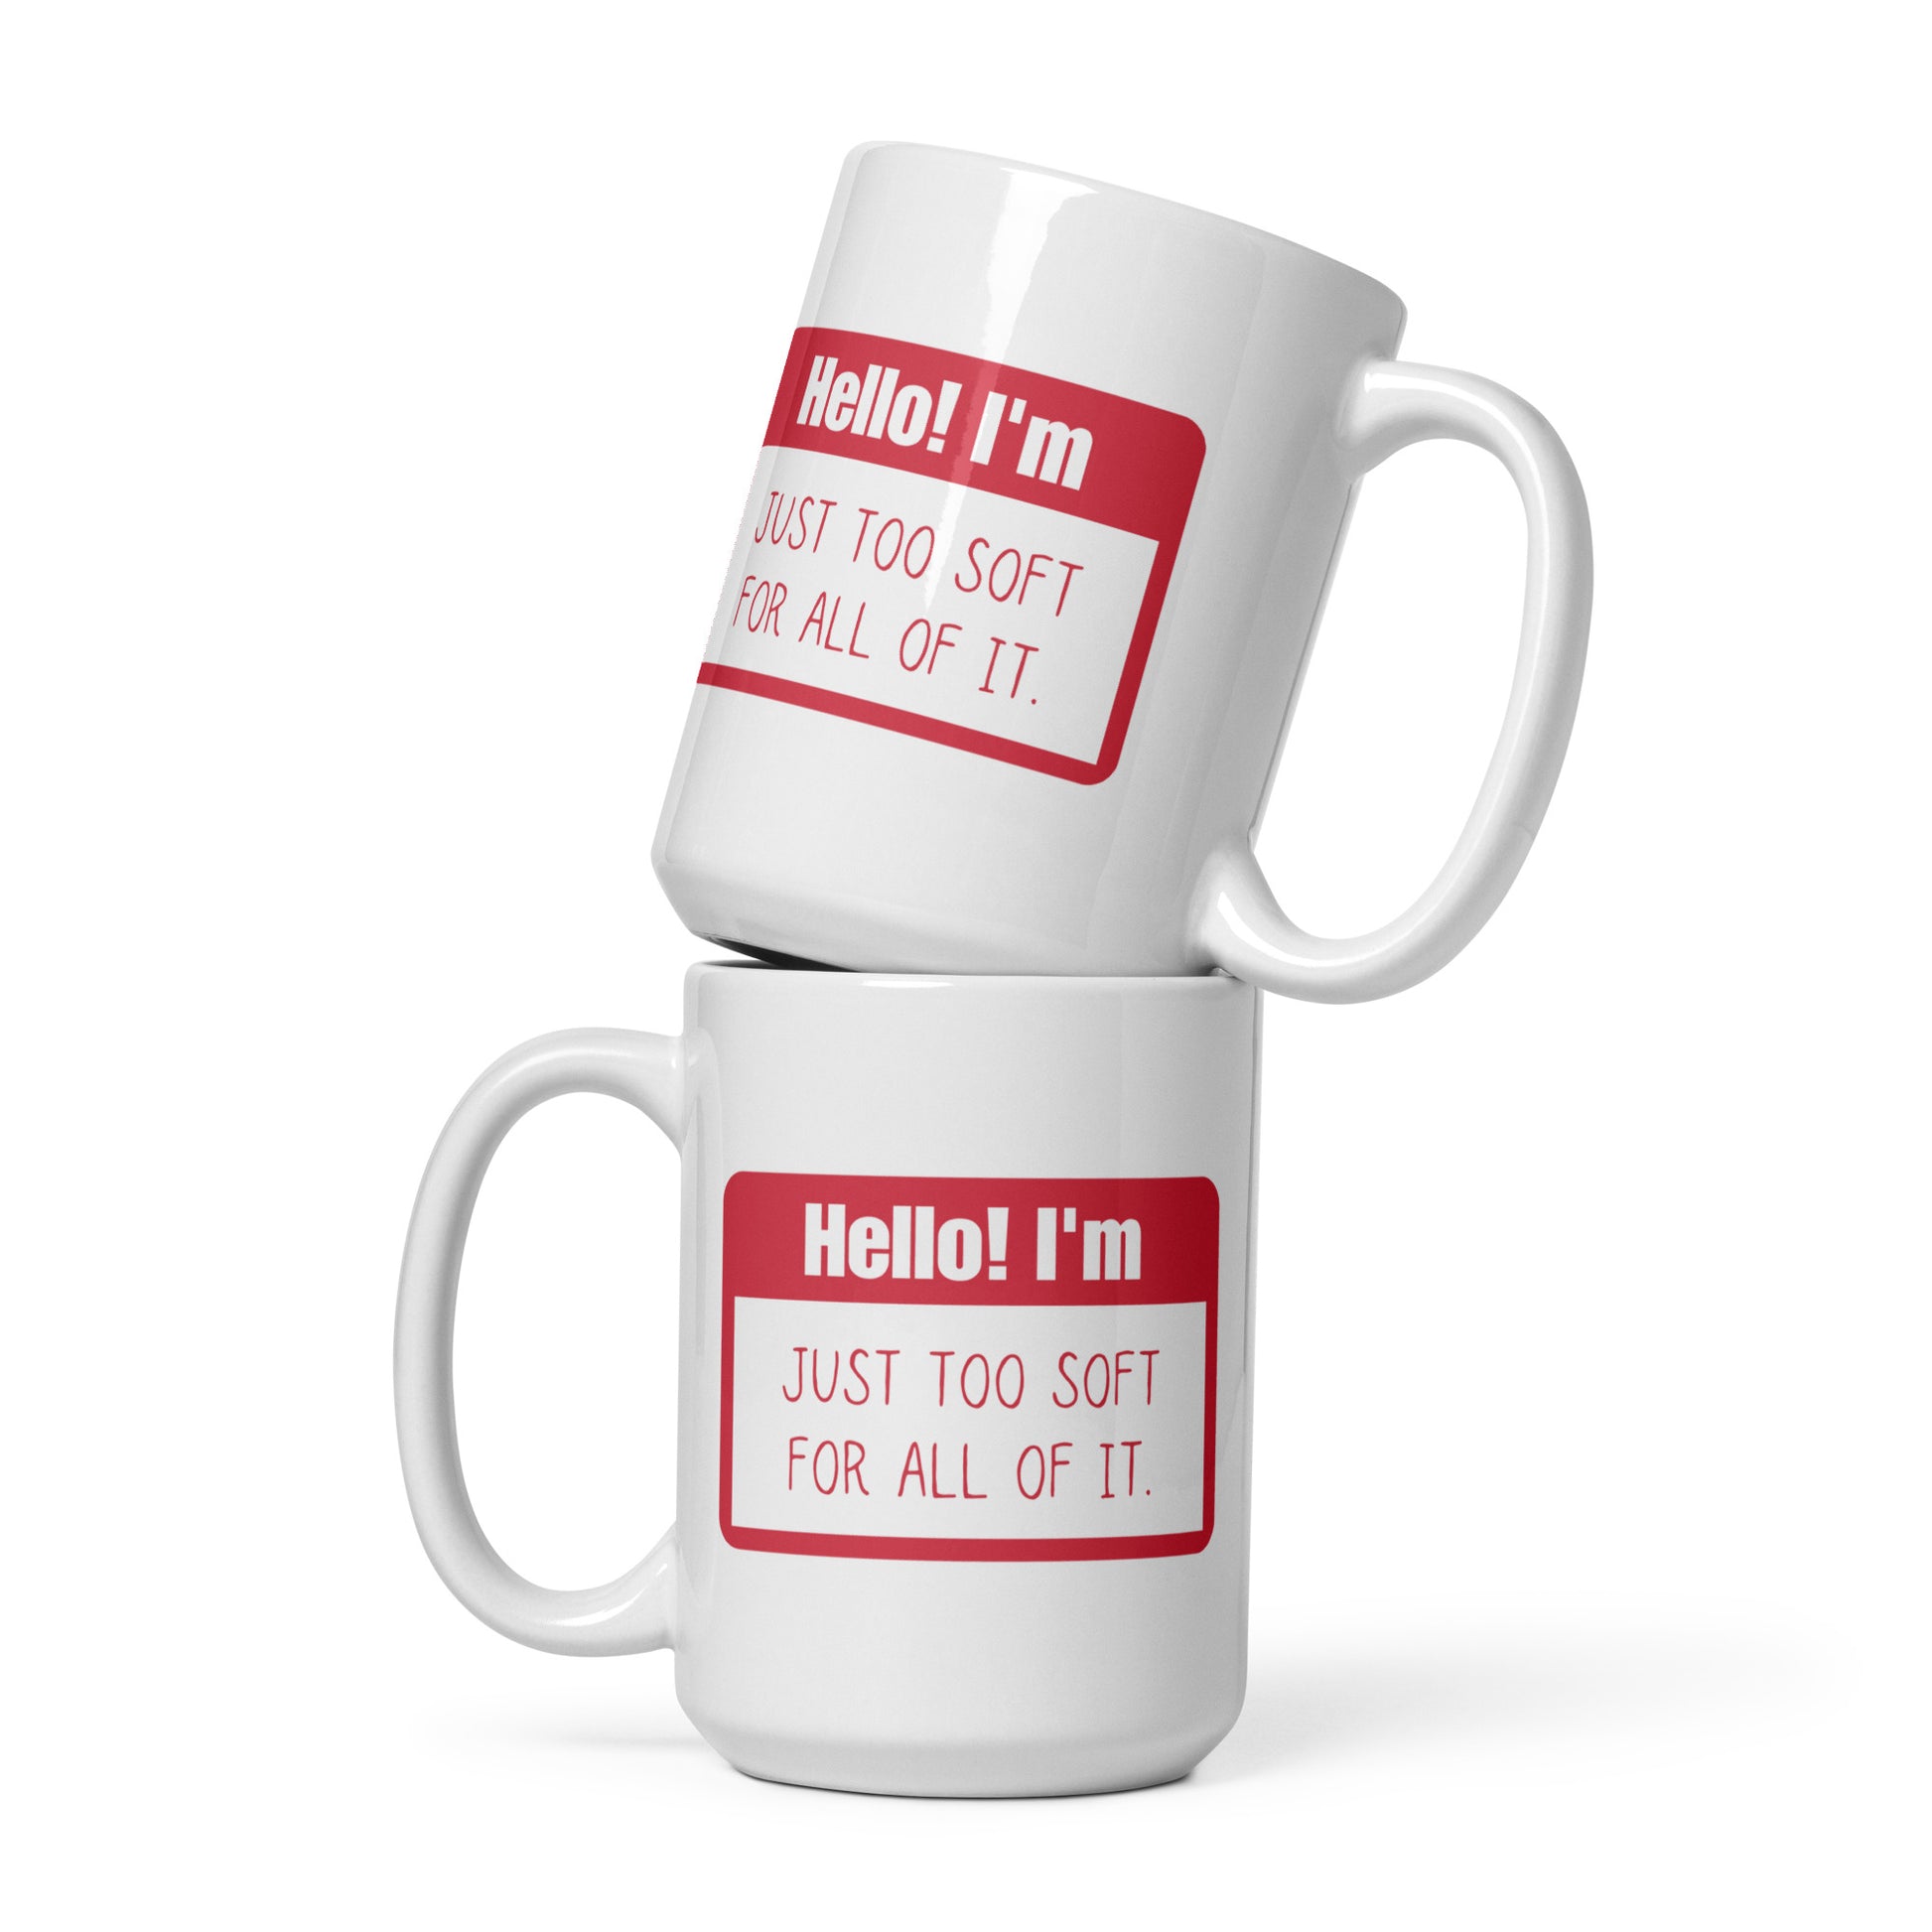 Hello! I'm Just Too Soft For All of It Mug